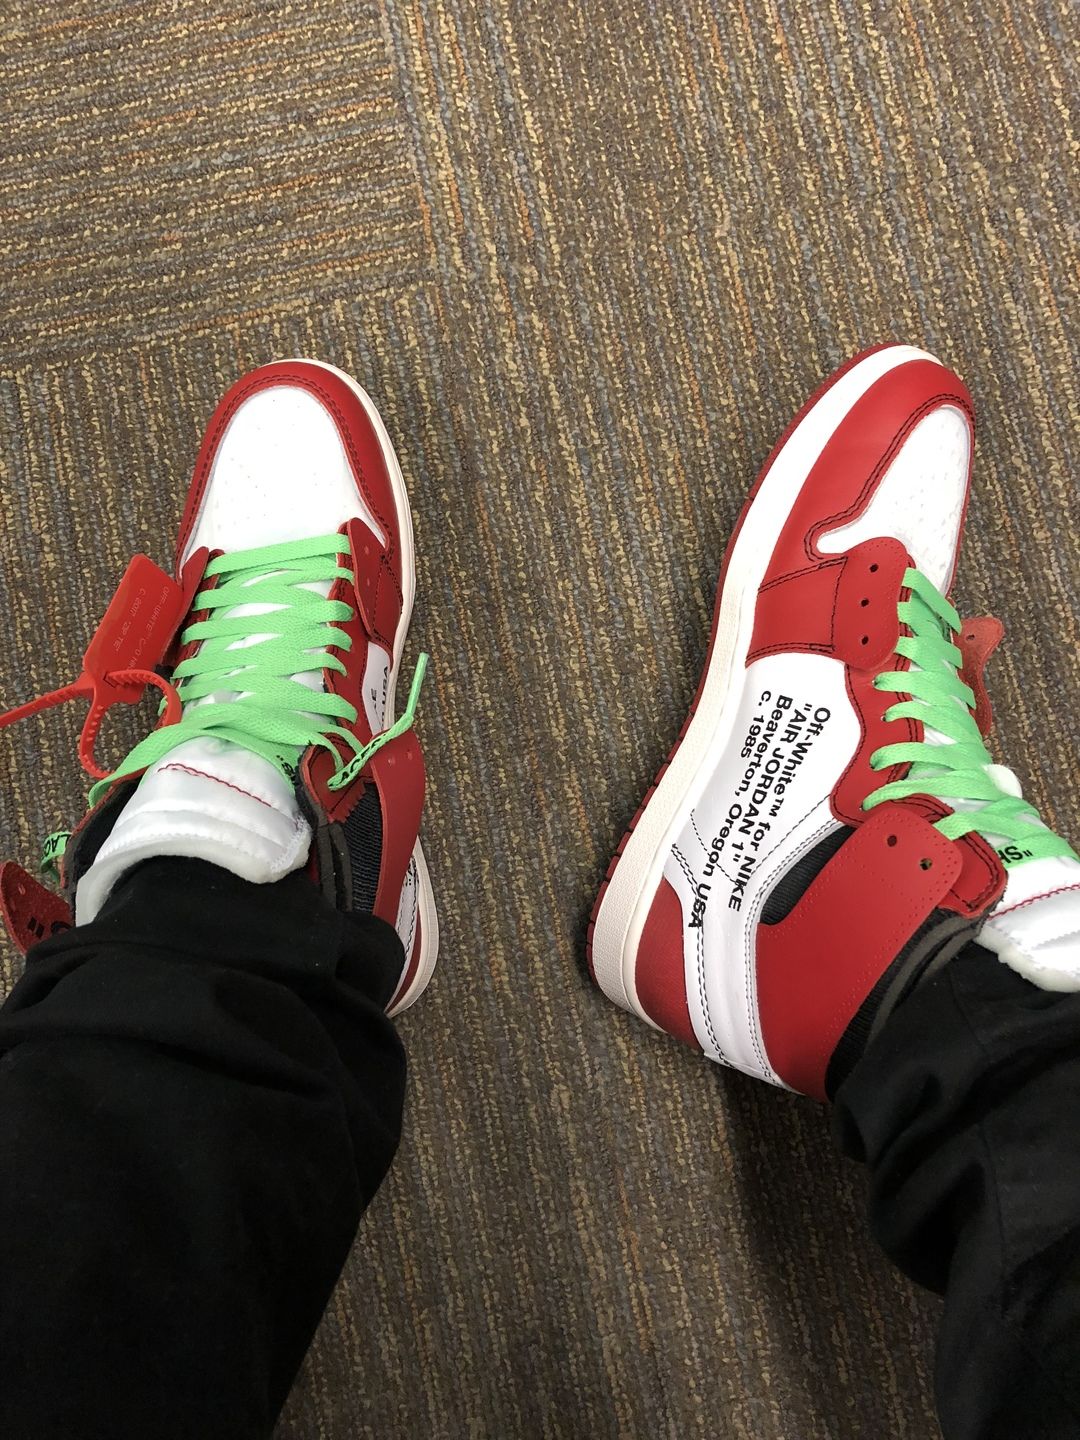 Off White Air Jordan 1 Red - Shoes | yzy.su